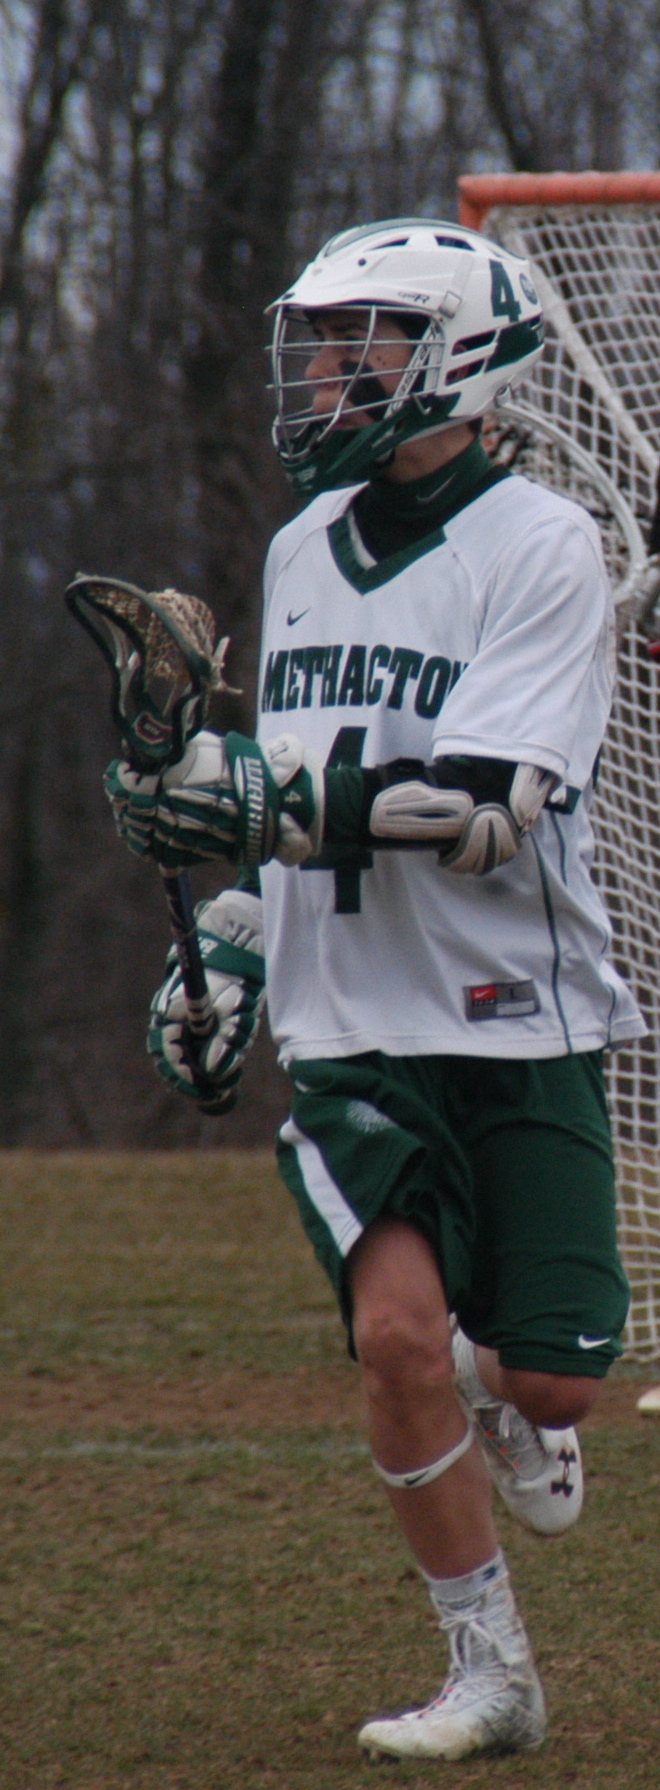 Sophomore Keith White scored a career high 6 Goals.